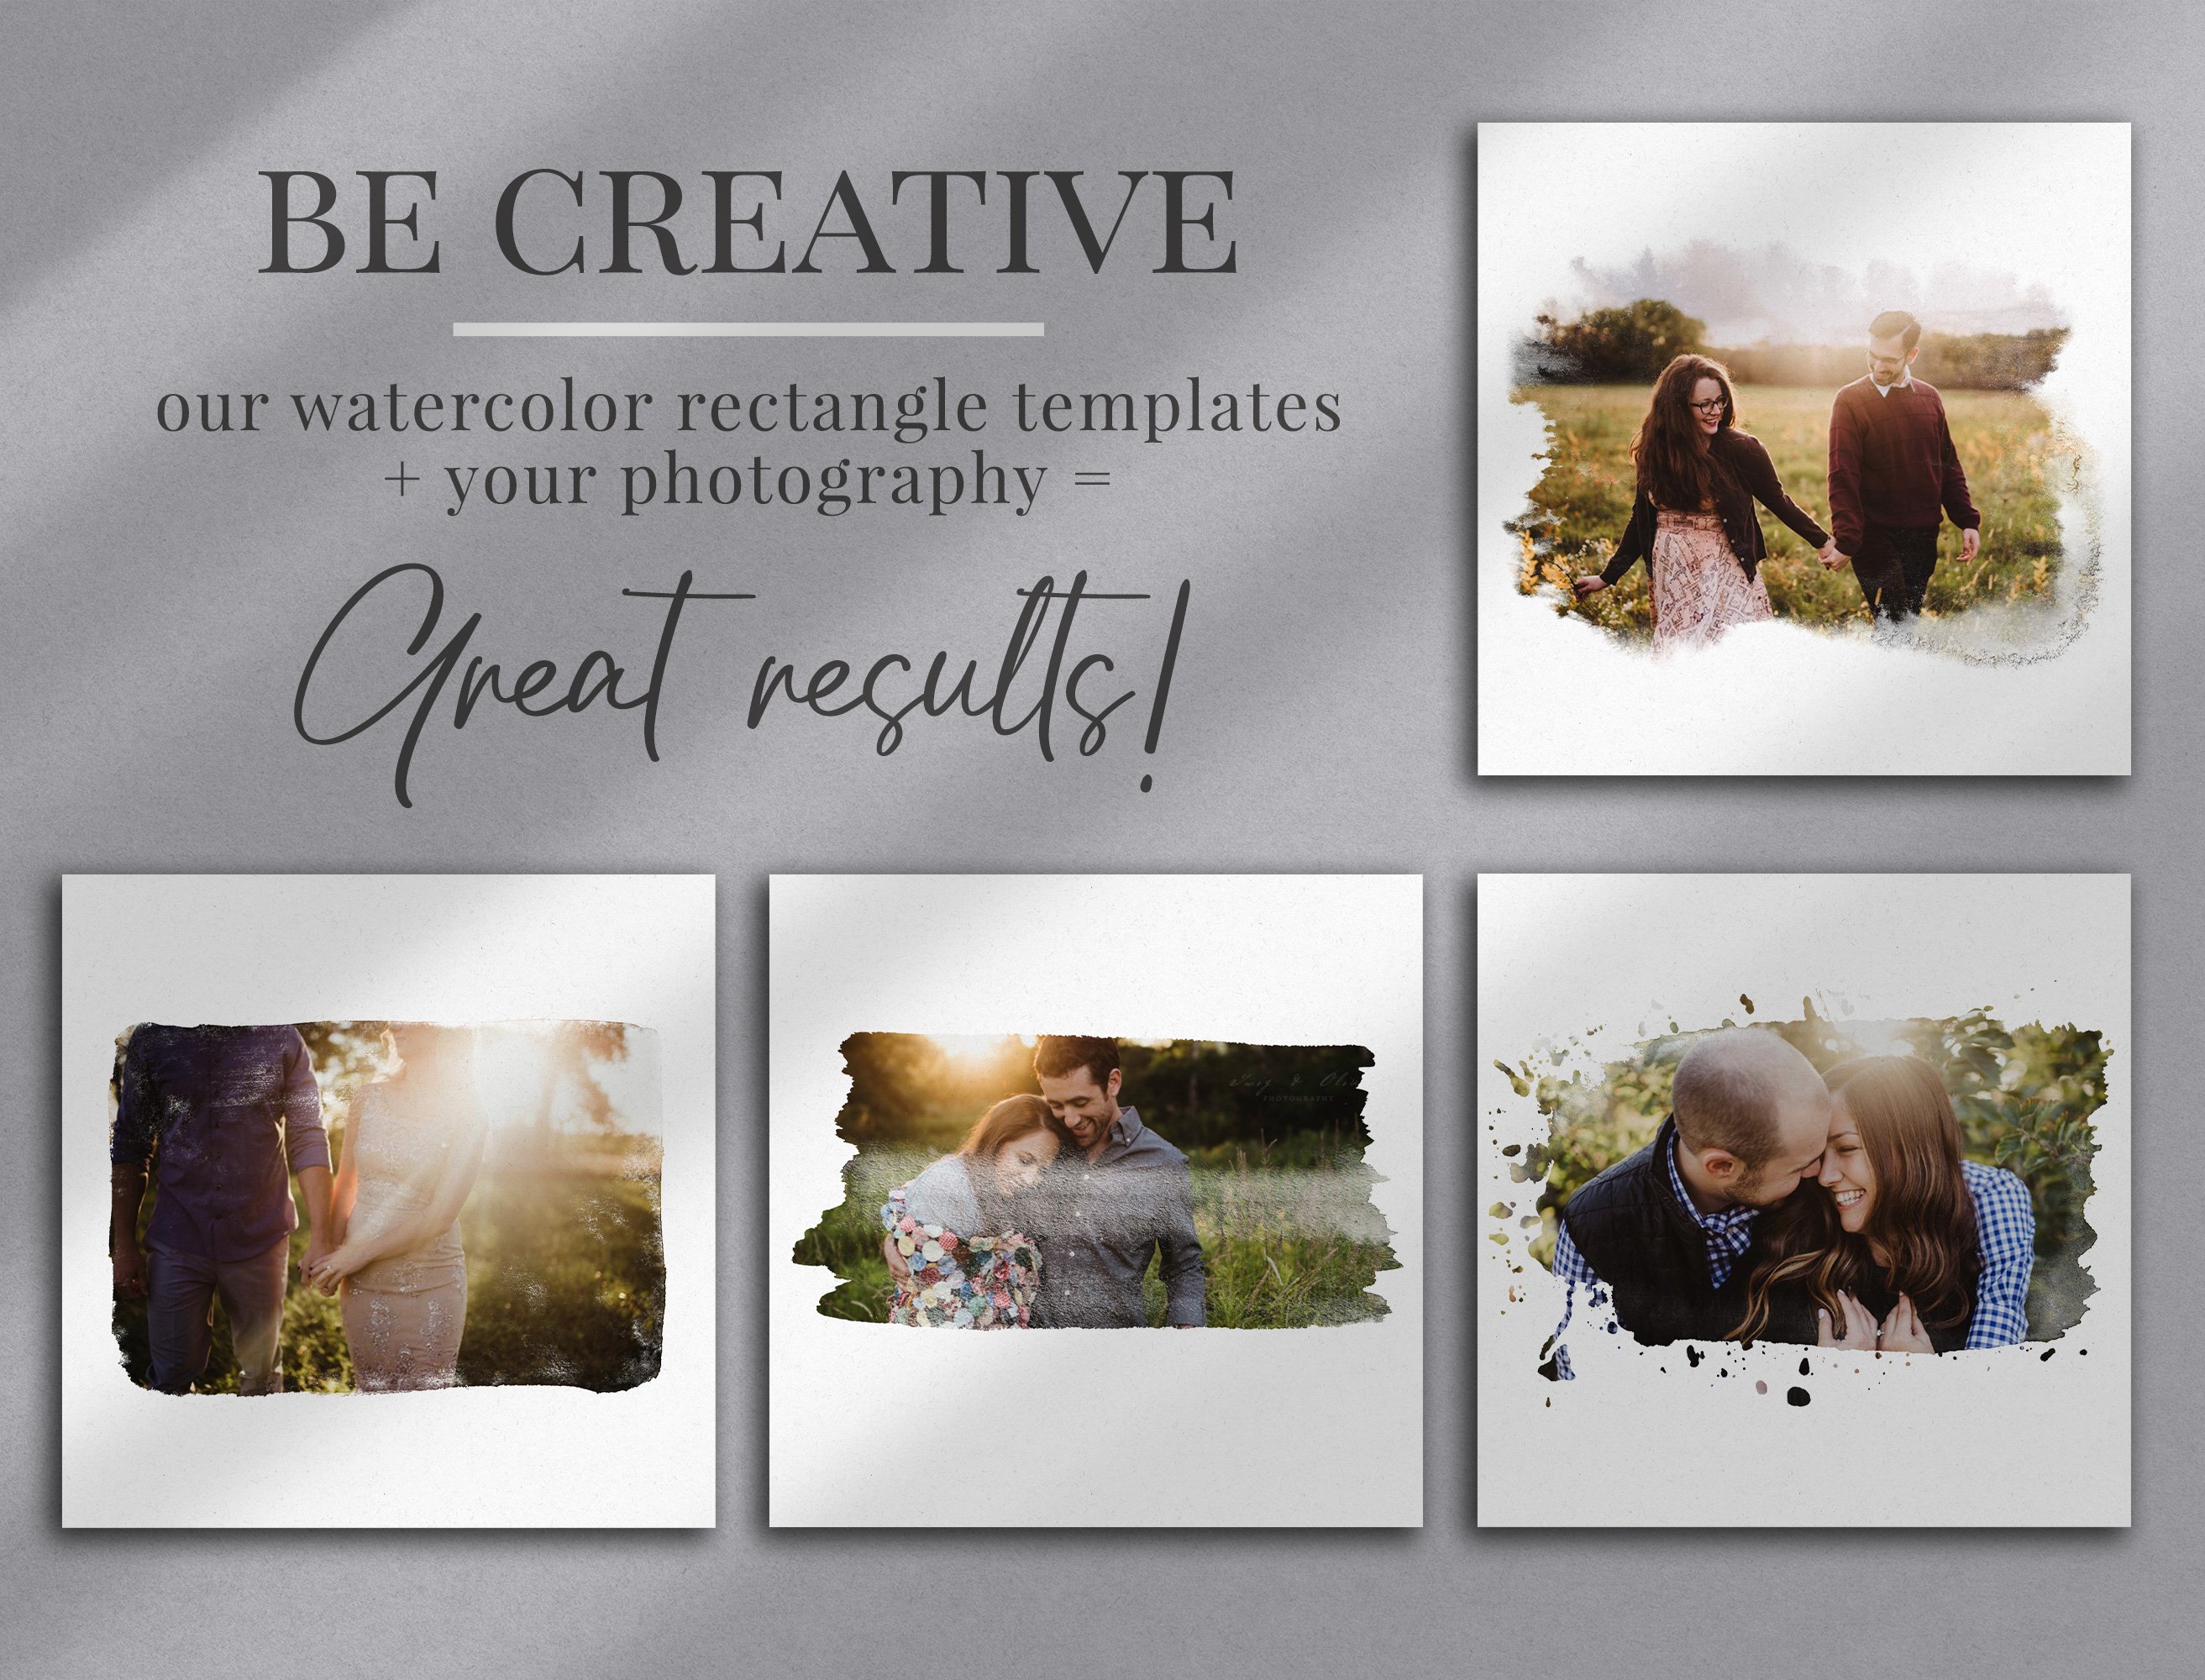 watercolor rectangles creative photomasks by brown leopard preview 2 677